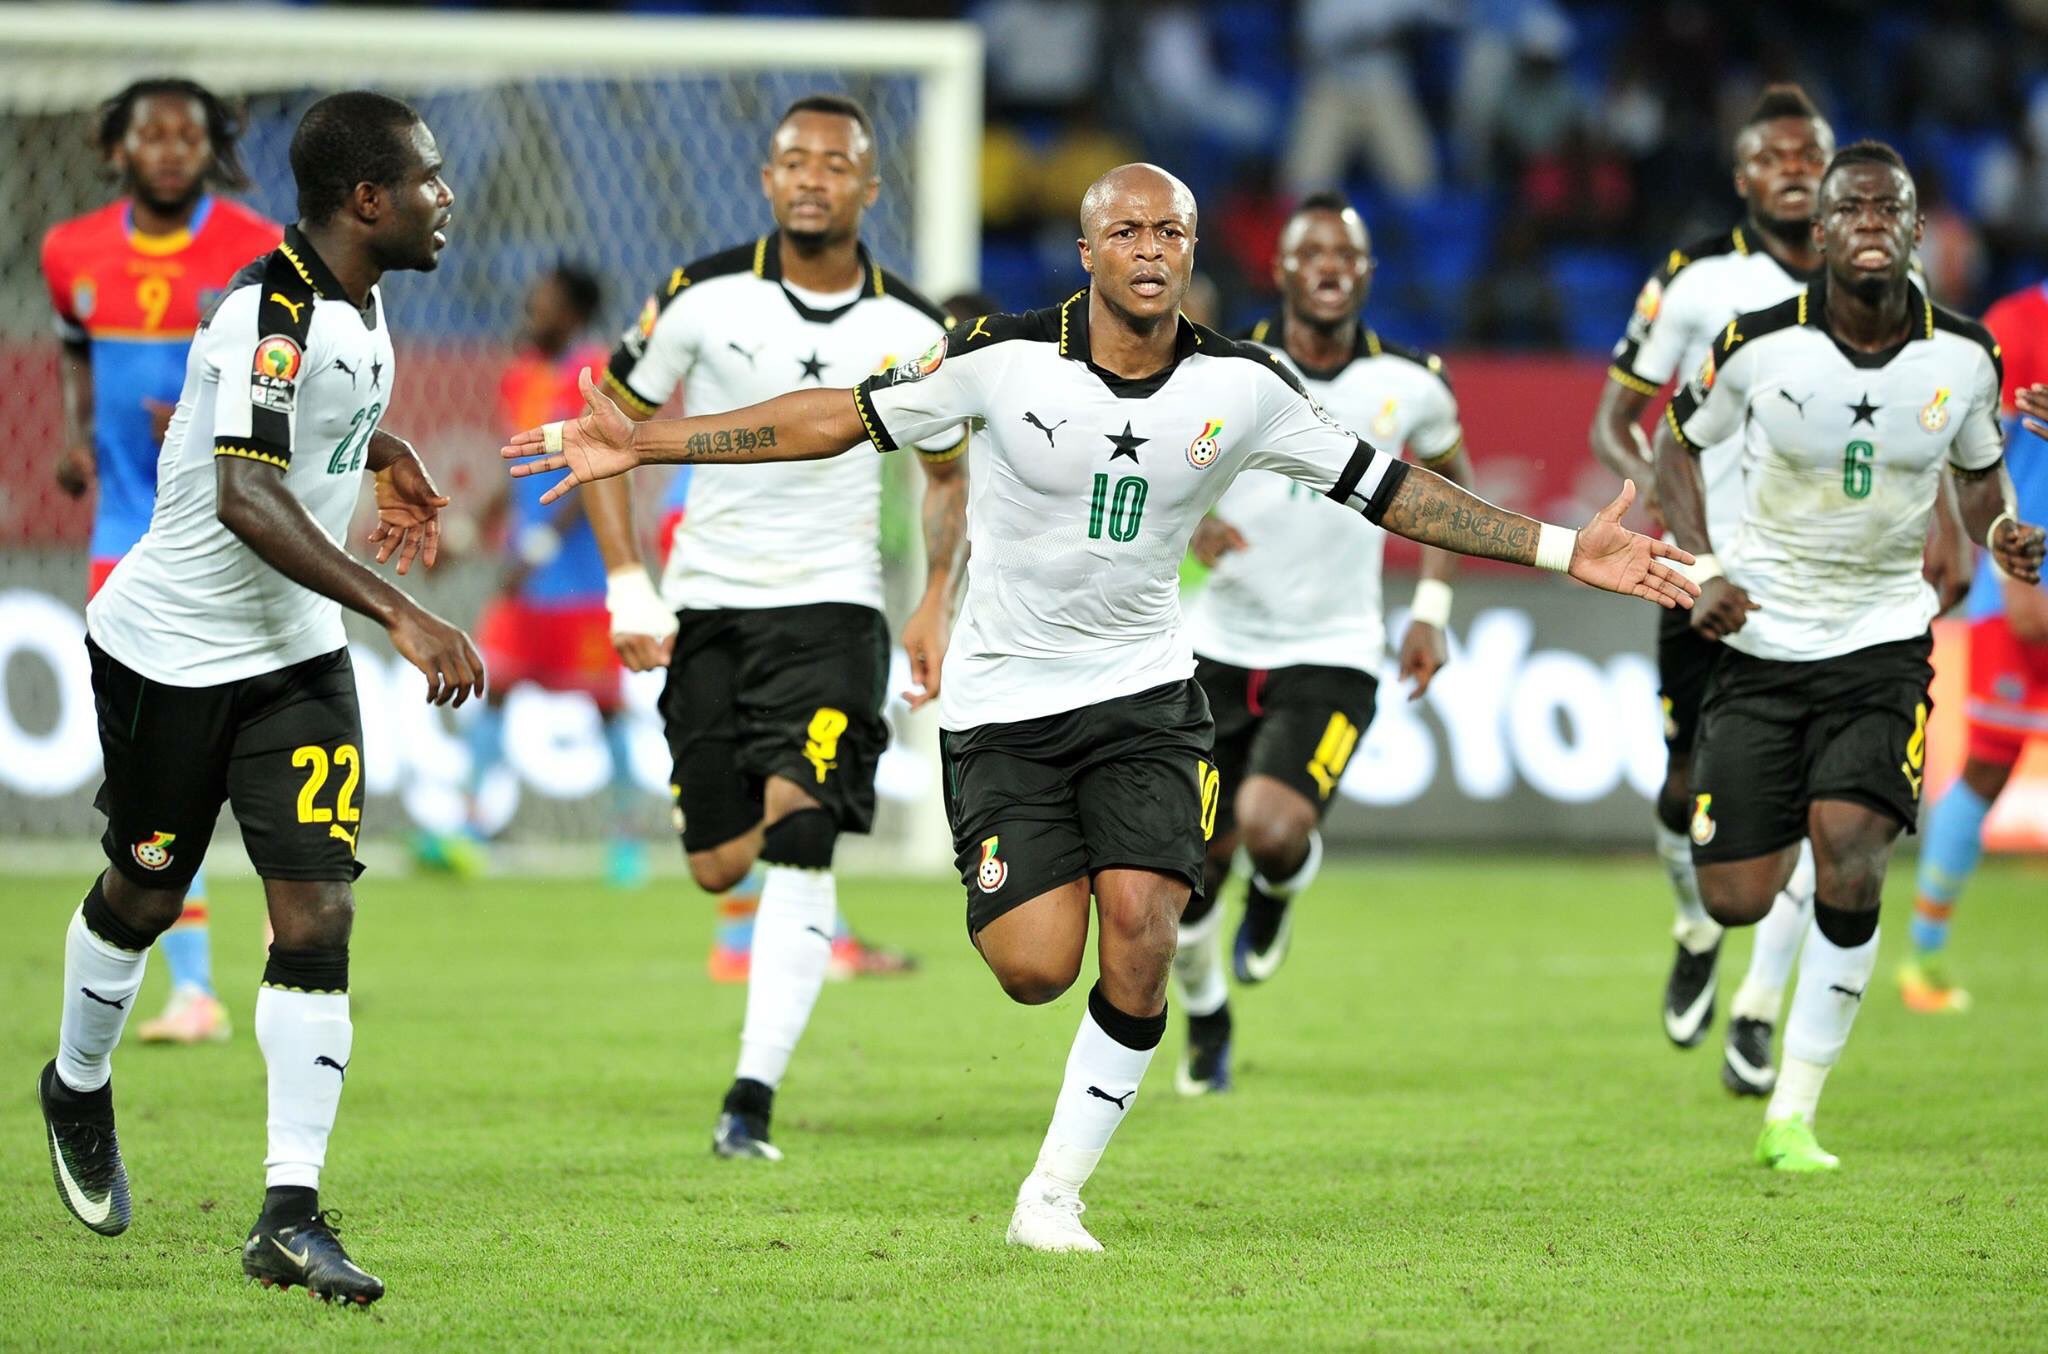 AFCON 2017: Ayew Brothers Score As Ghana Edge DR Congo, Reach Semis